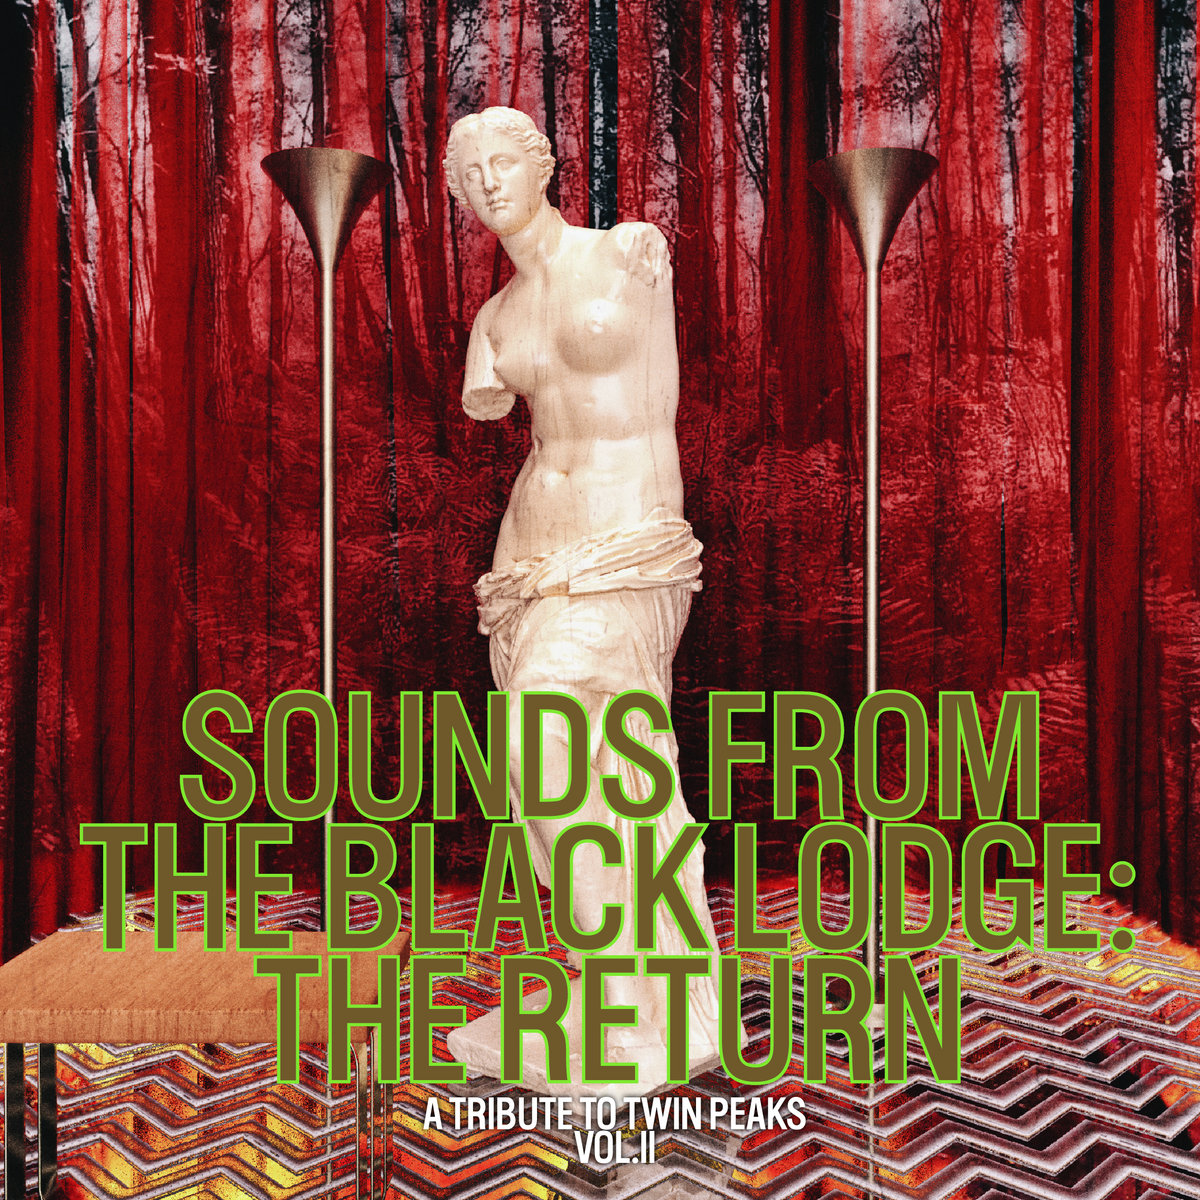 Sounds from the Black Lodge: The Return - A Tribute to Twin Peaks, Vol. II